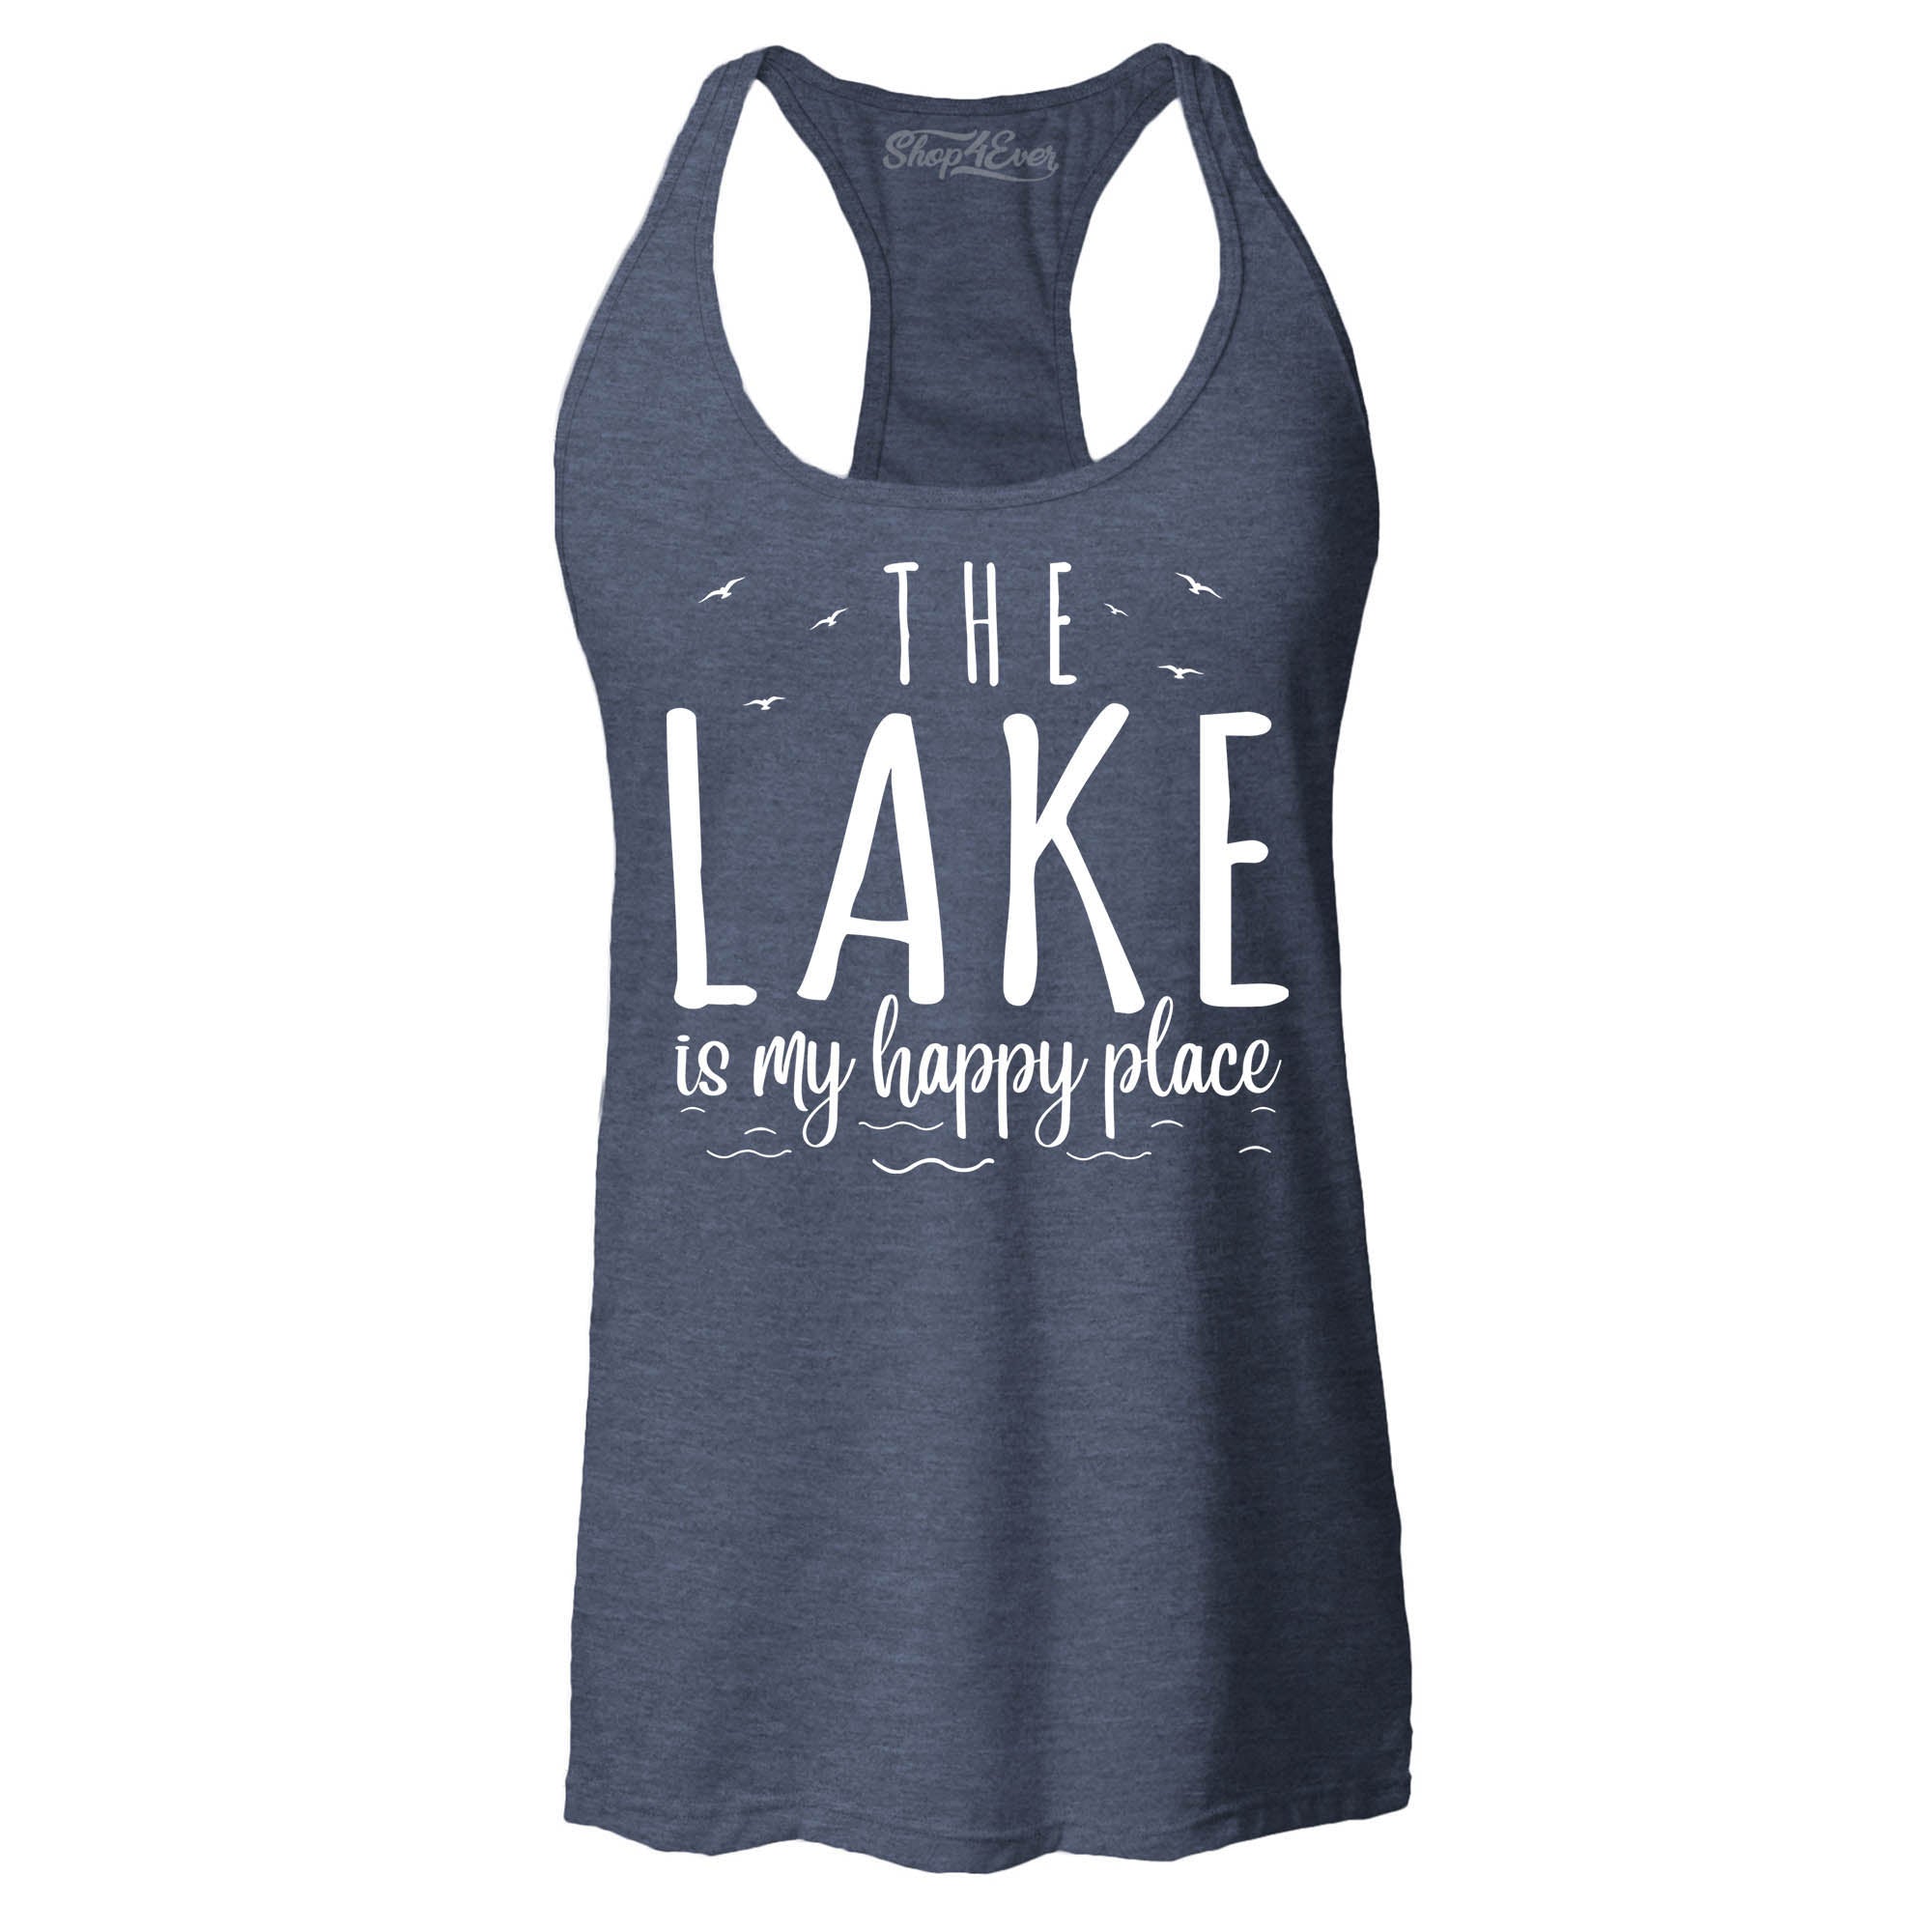 The Lake is My Happy Place Women's Racerback Tank Top Slim Fit